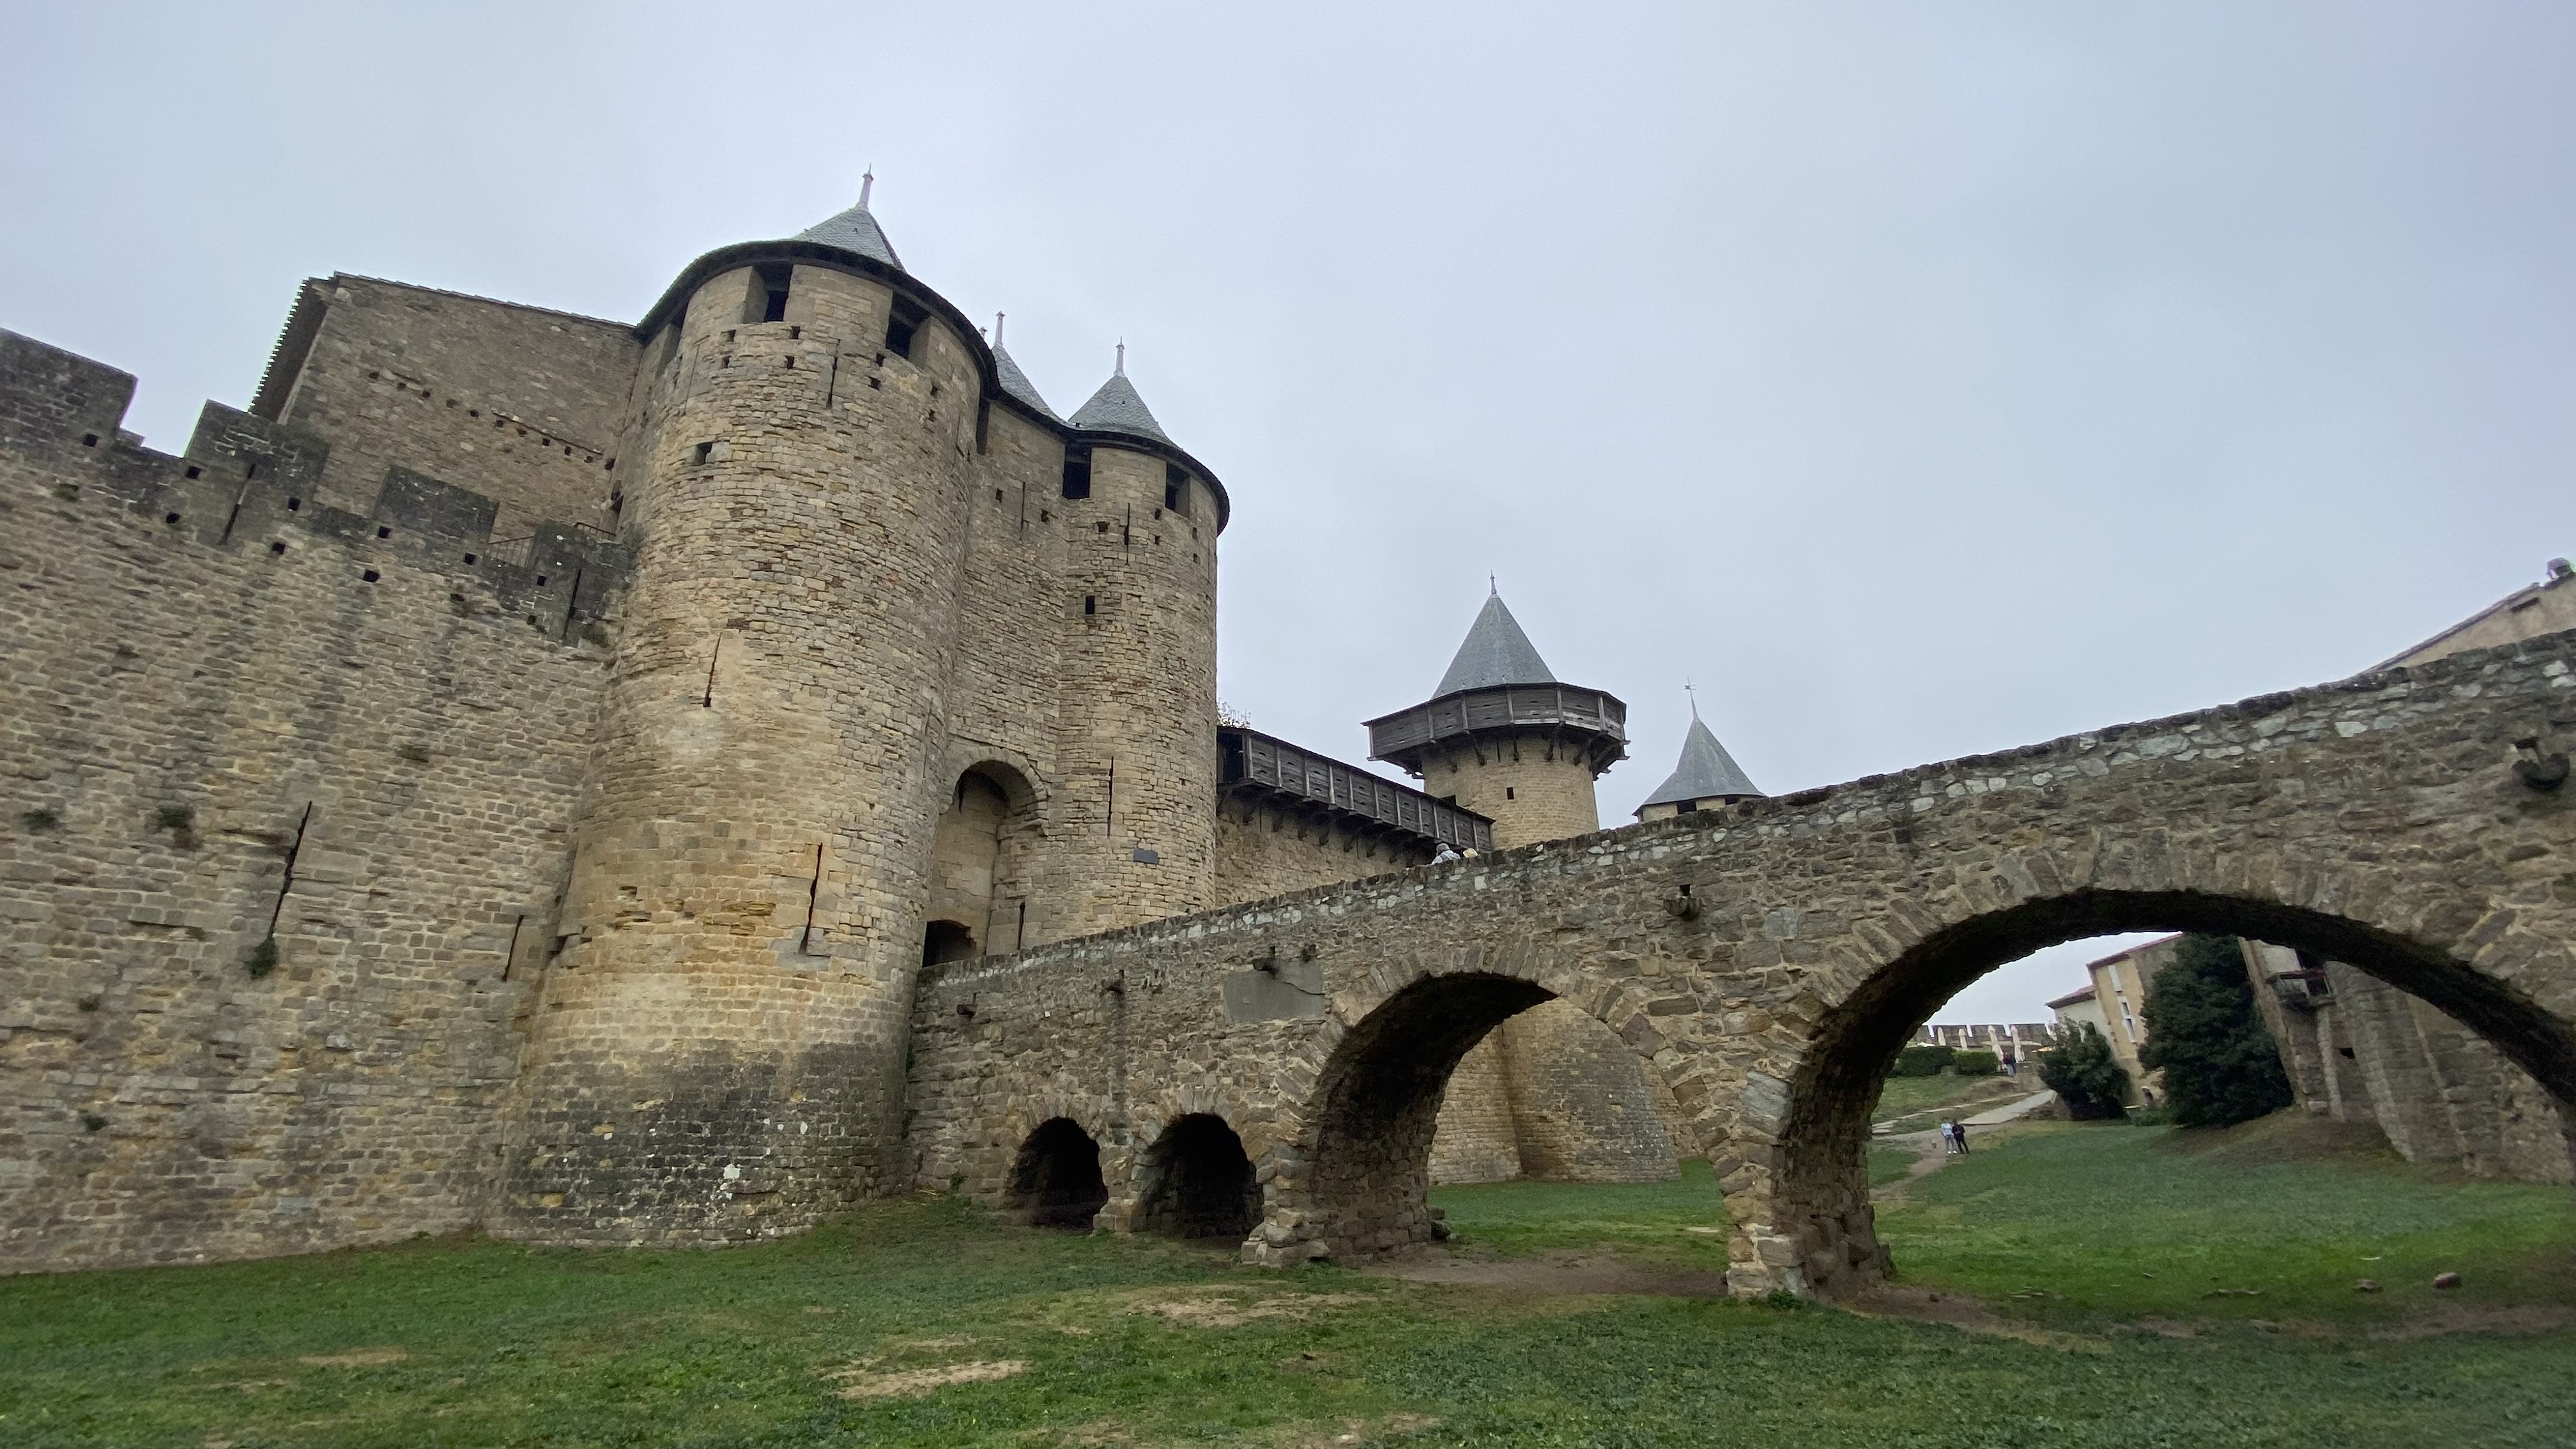 The medieval town of Carcassone